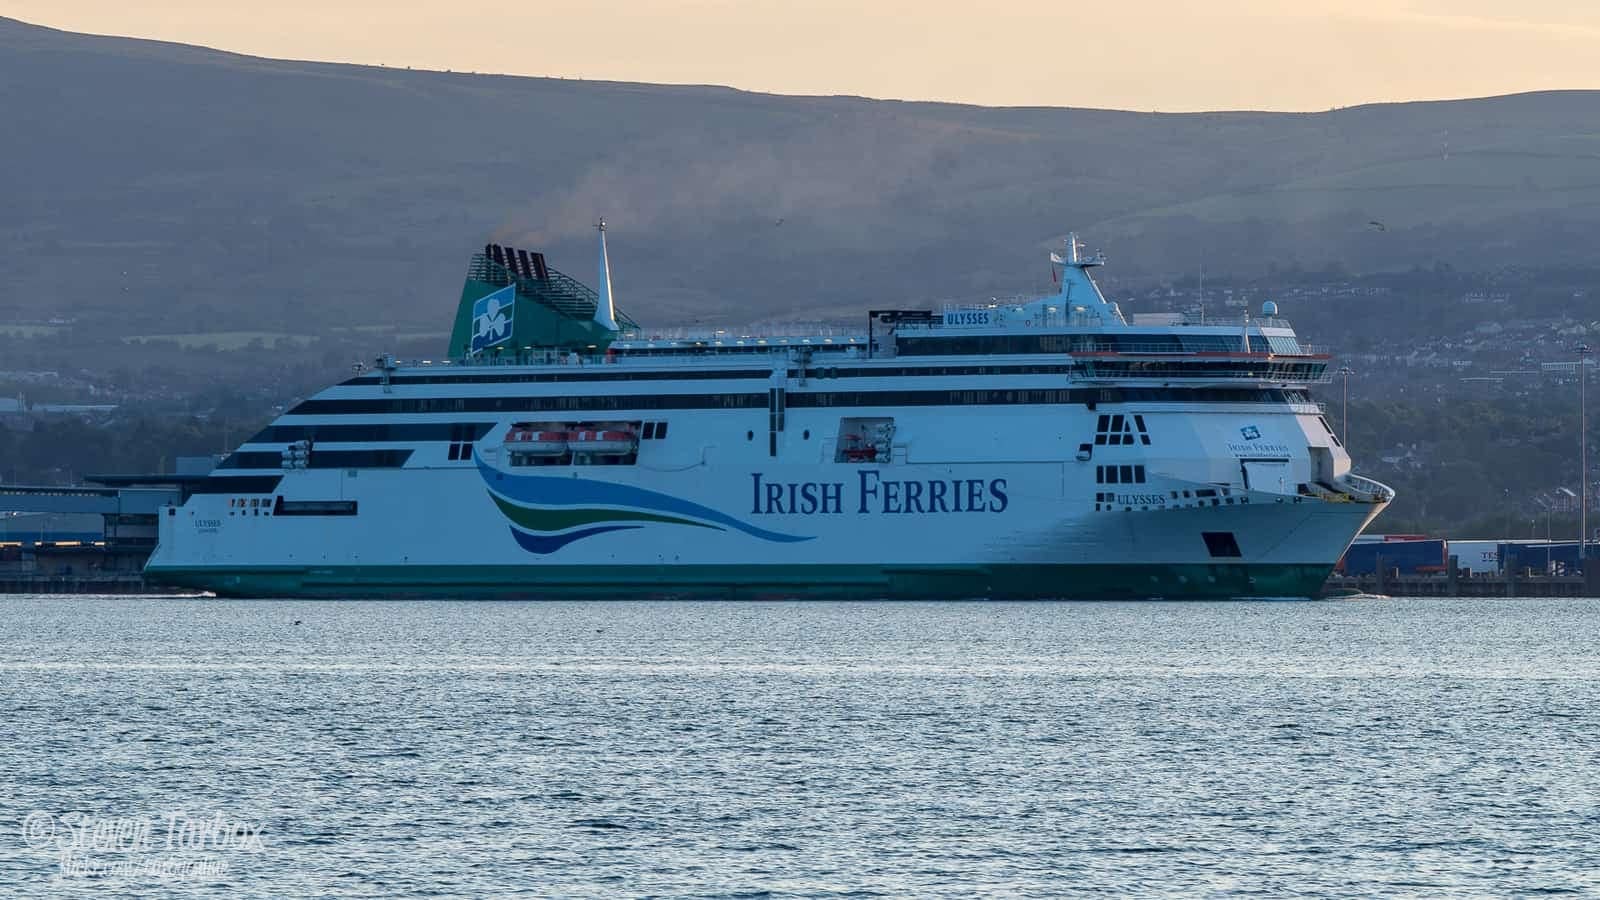 Irish Ferries ULYSSES leaves Belfast after spending almost a month in dry dock. Copyright Steven Tarbox